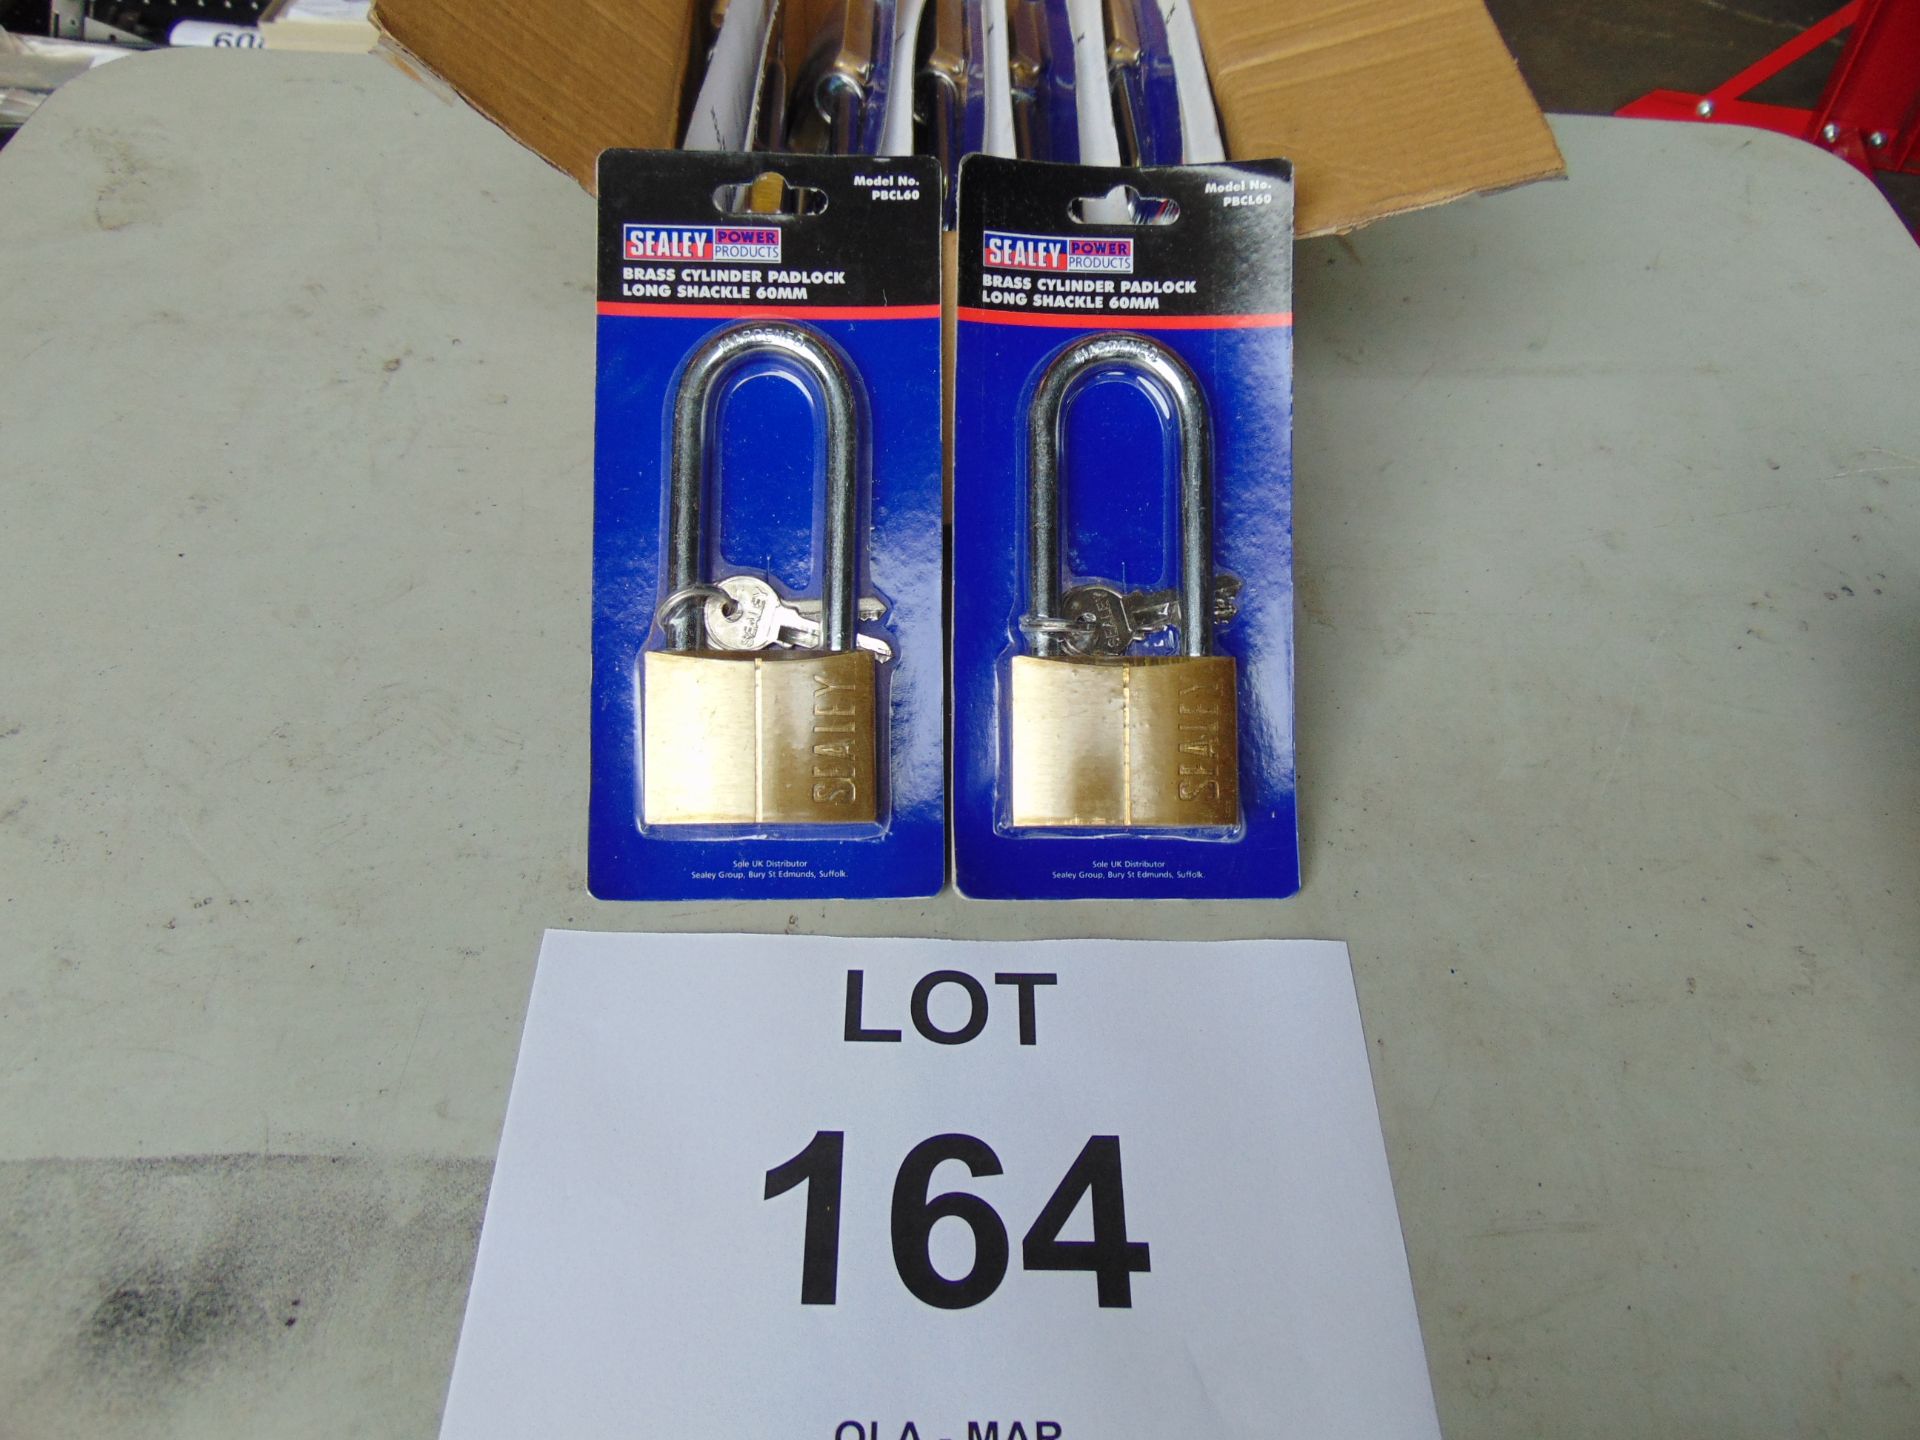 12 x Sealey Brass Long shank Cylinder Padlock New Unissued in original packing